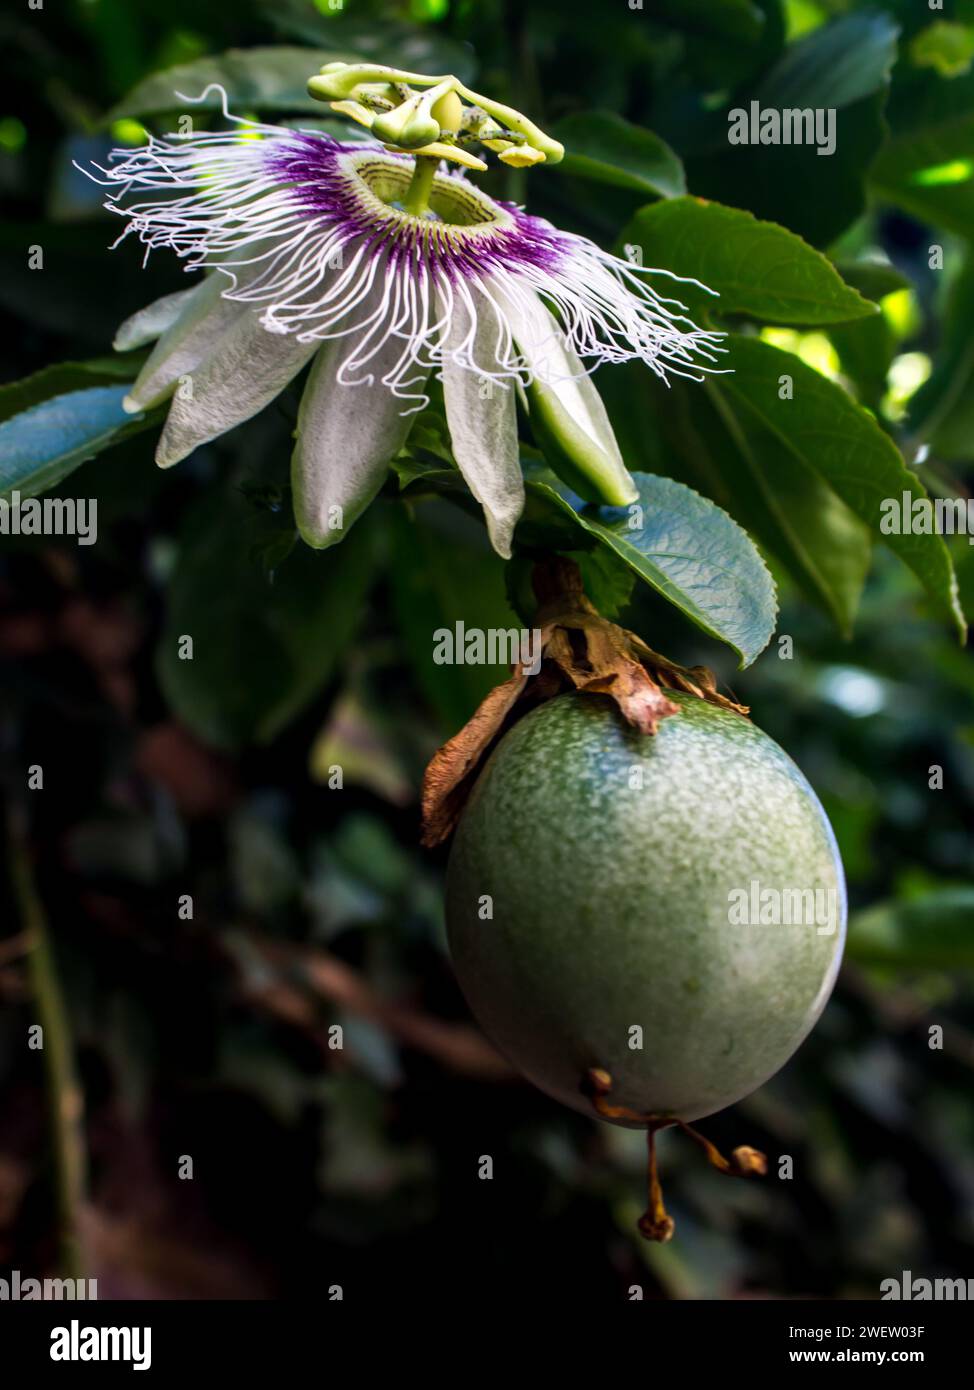 Flower and a green fruit of a Passion fruit plant, Passiflora Edulis, still on the vine. Stock Photo